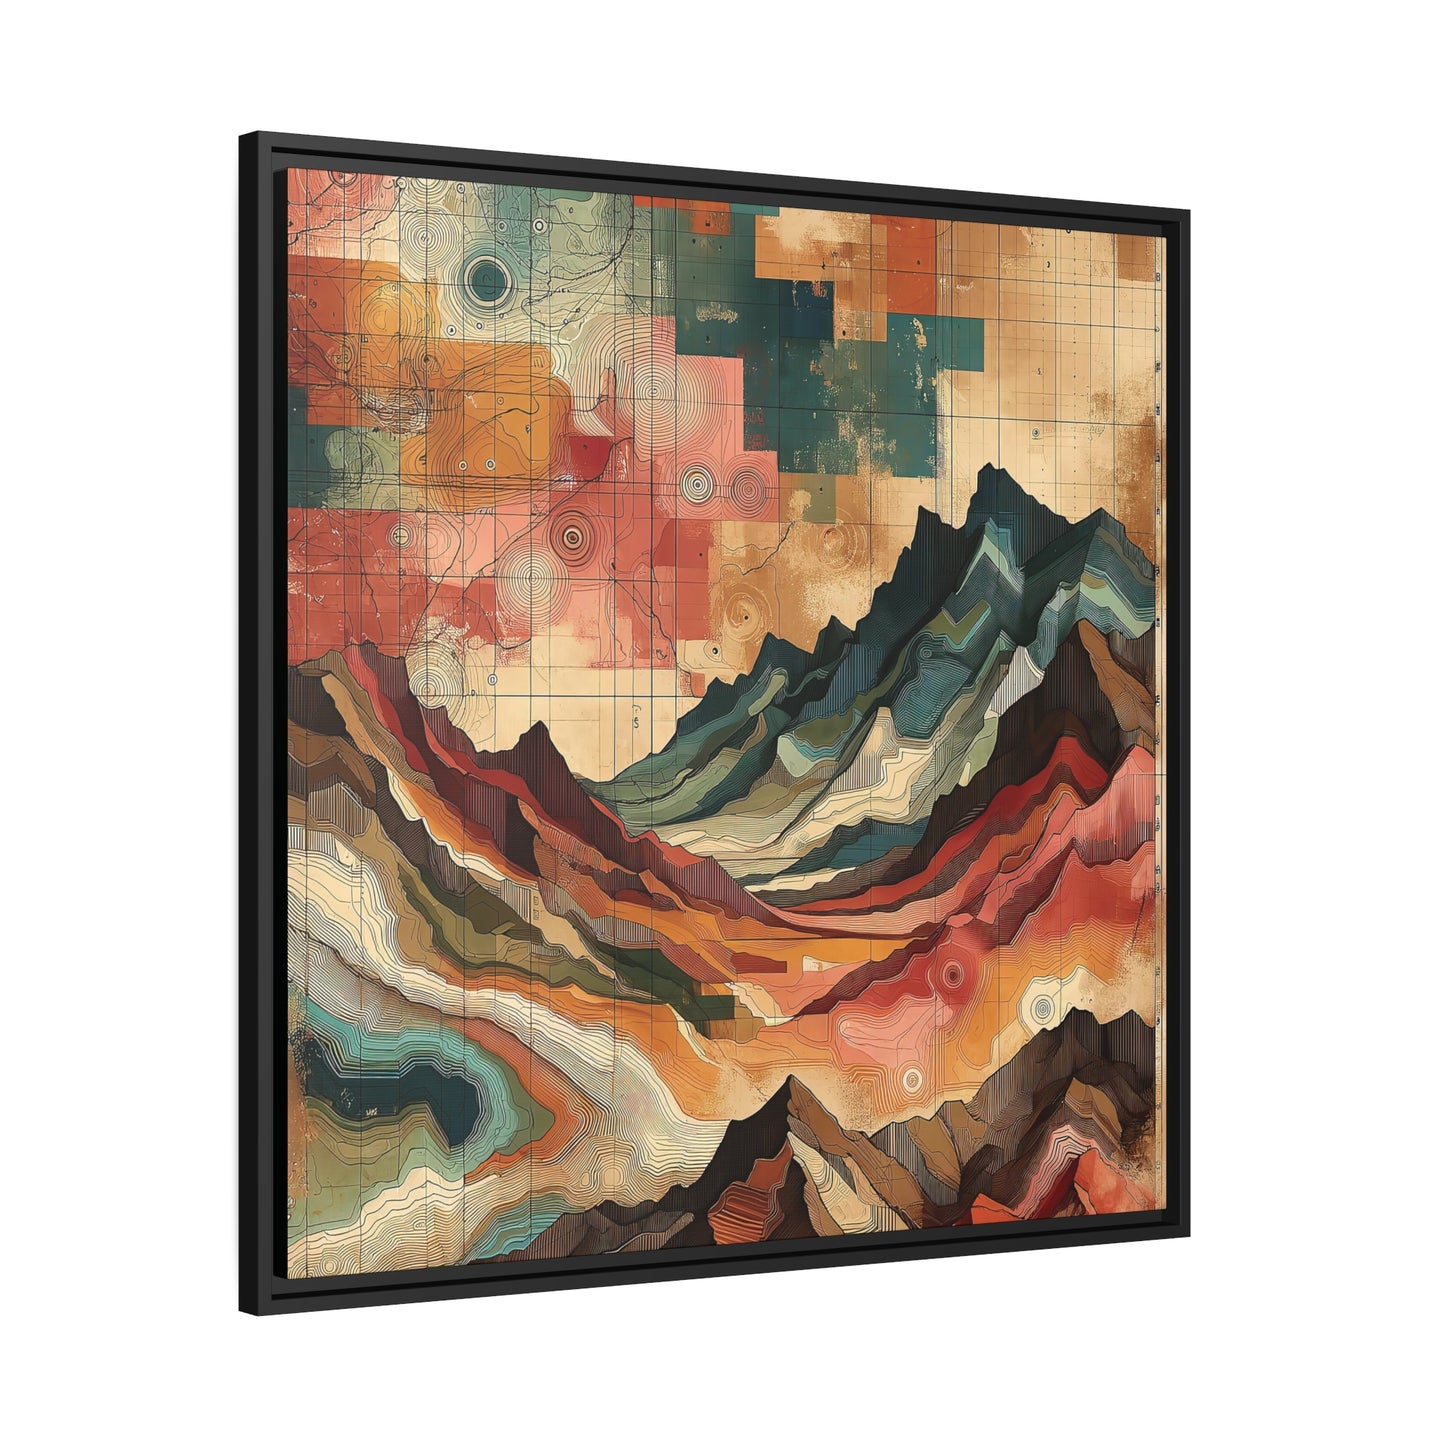 Rugged Mountain Map II | Digital Abstract Work of Art | FRAMED CANVAS WRAP